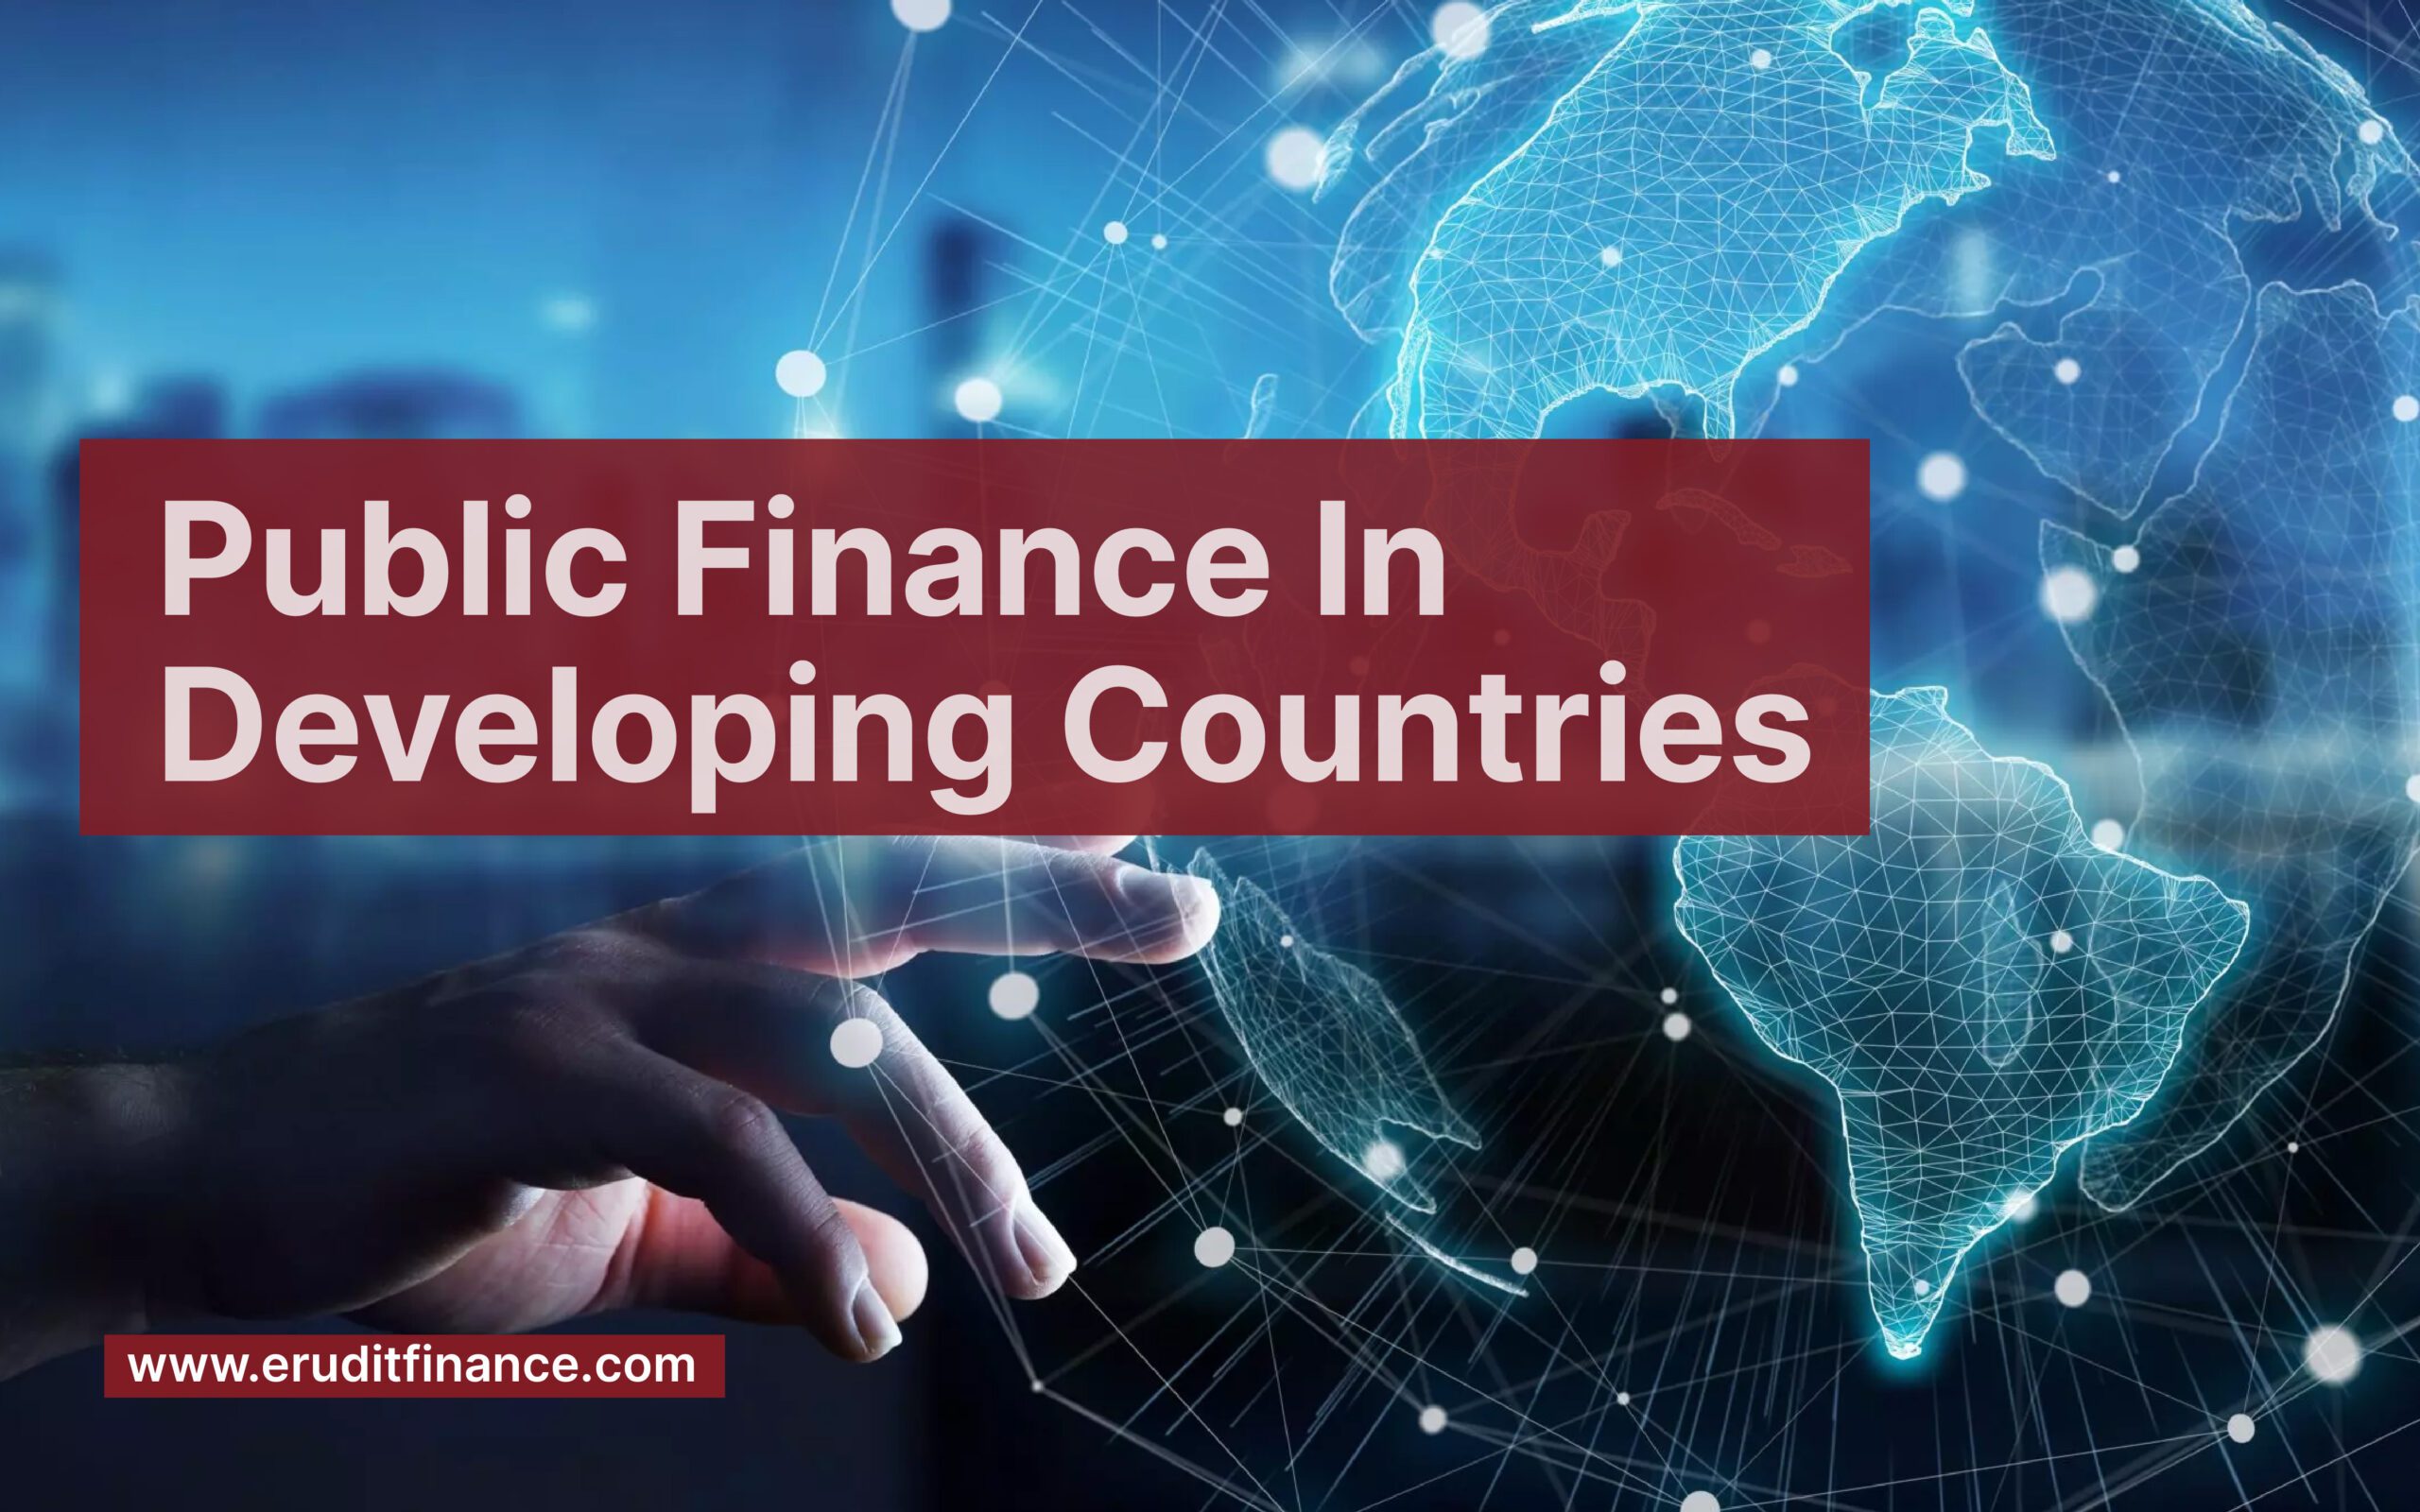 Public Finance in Developing Countries